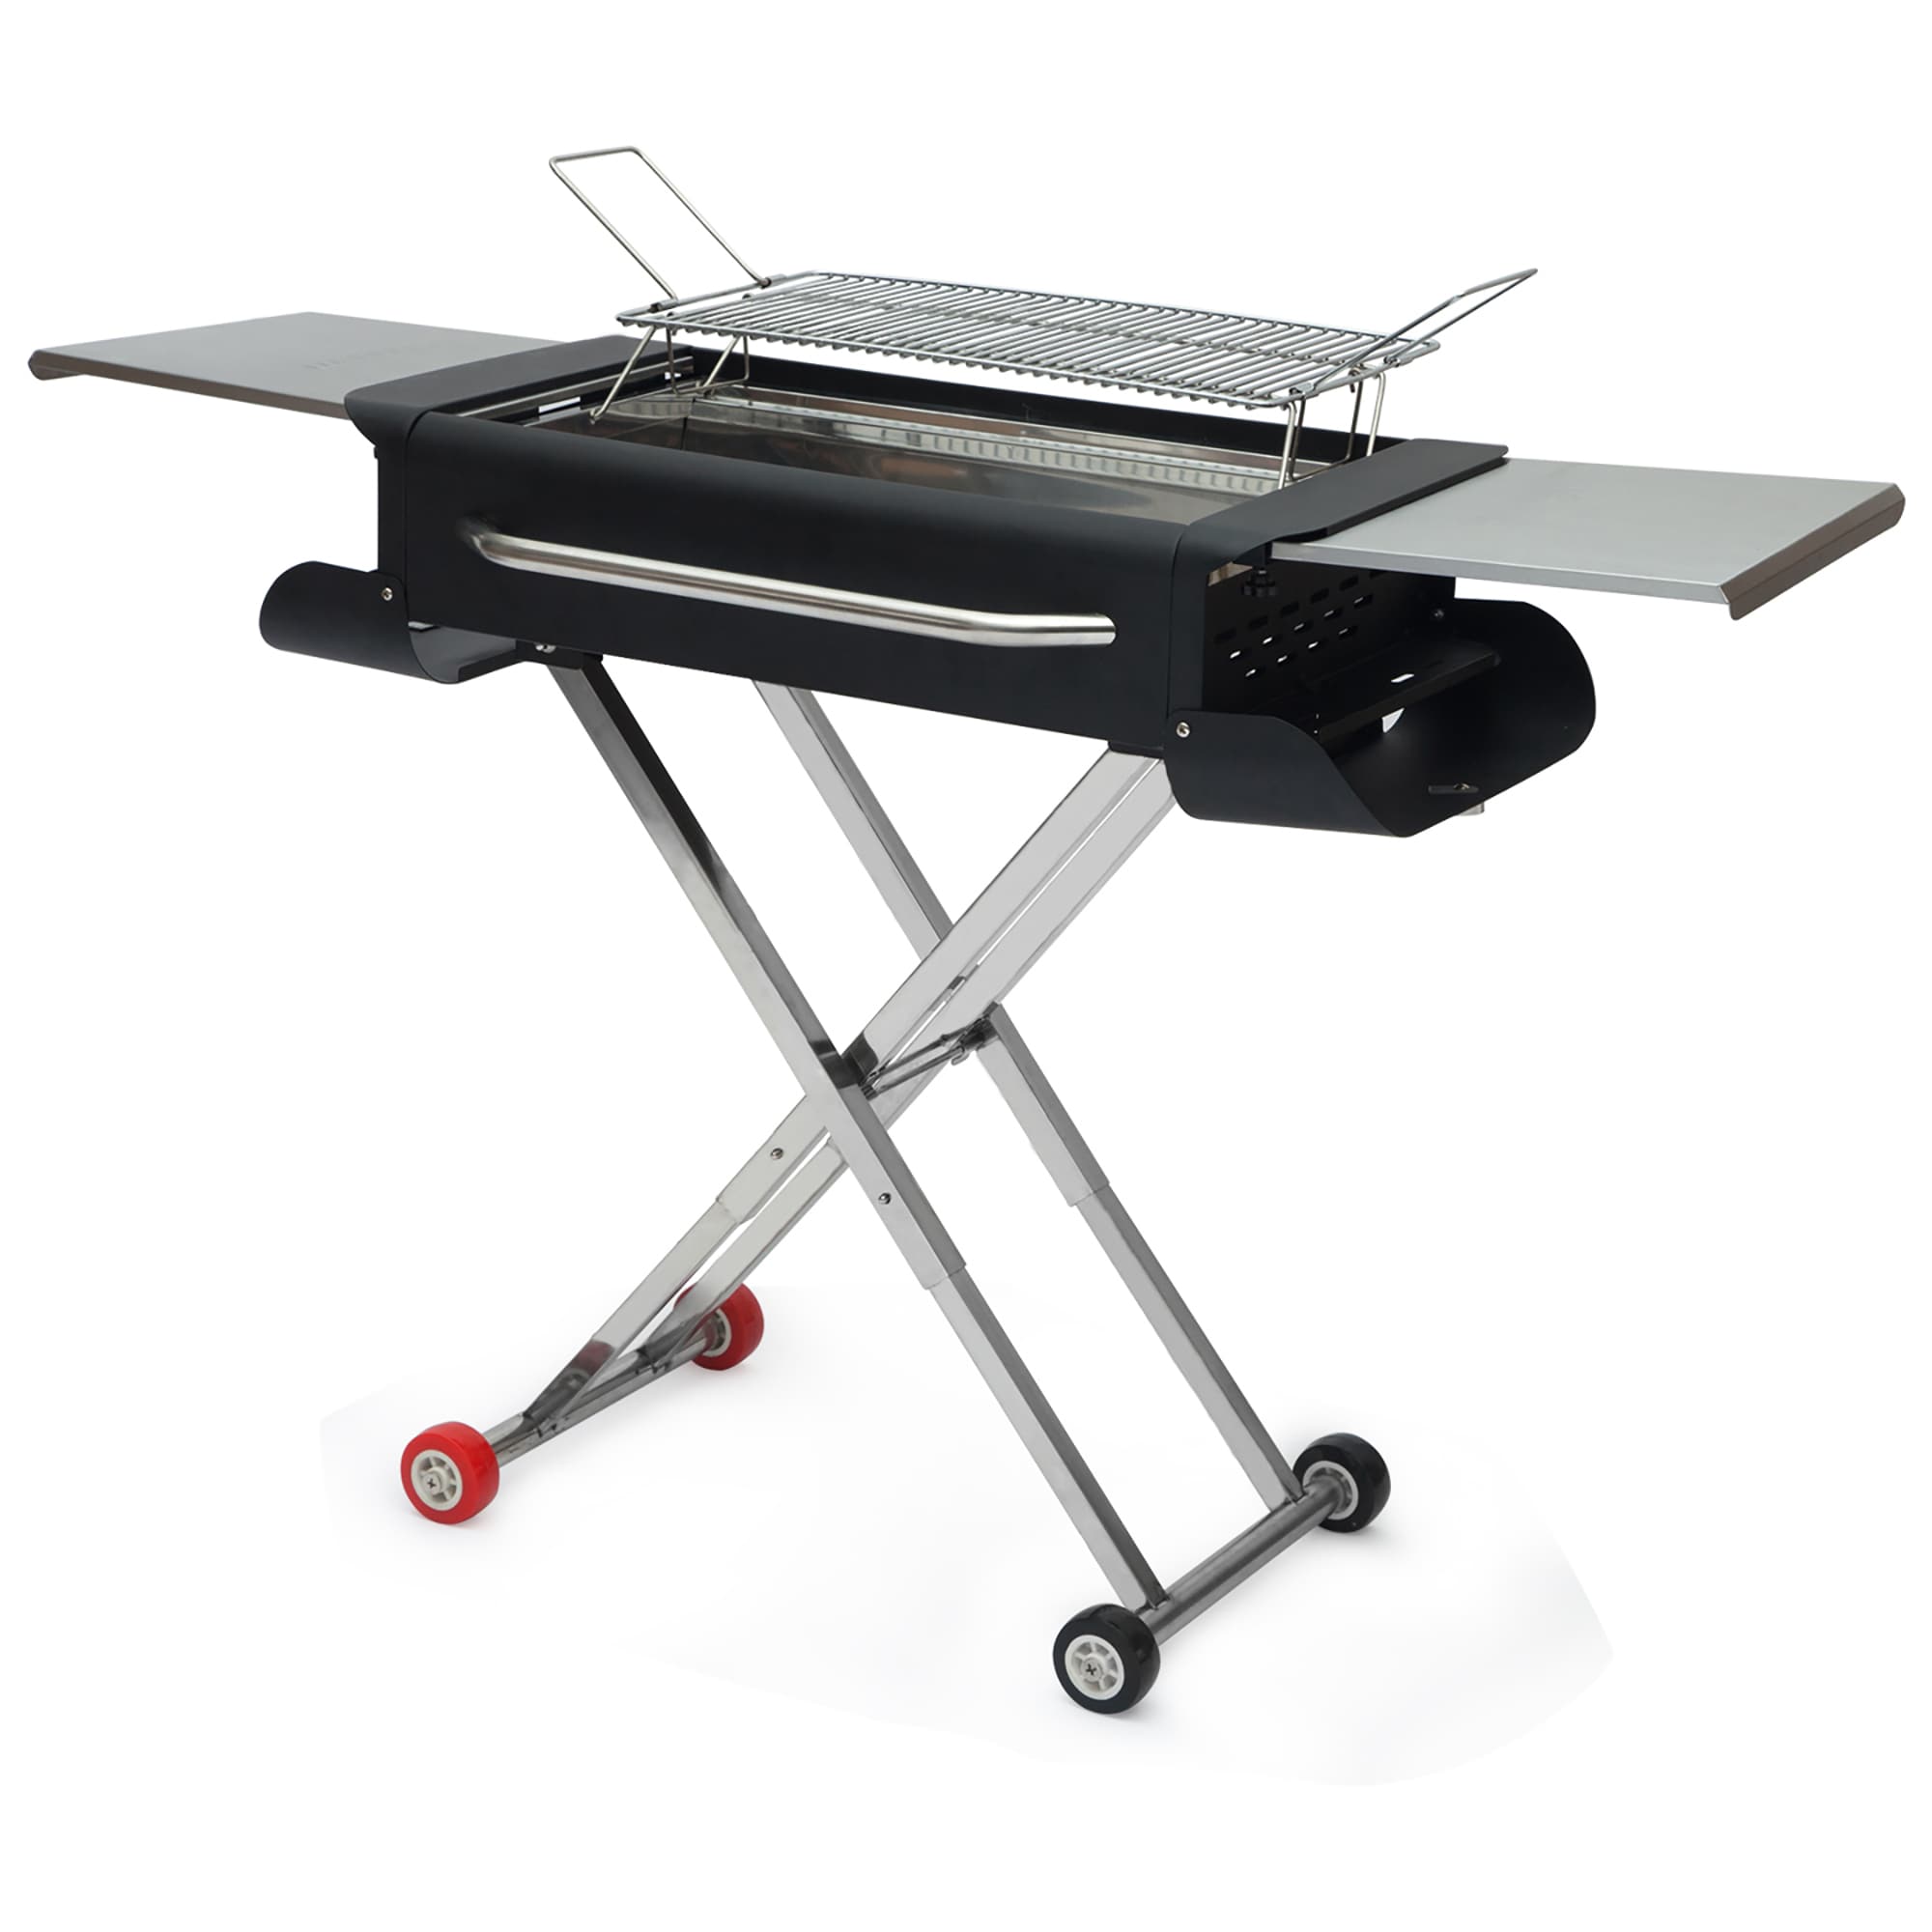 Buy fishing charcoal grills Online in Angola at Low Prices at desertcart